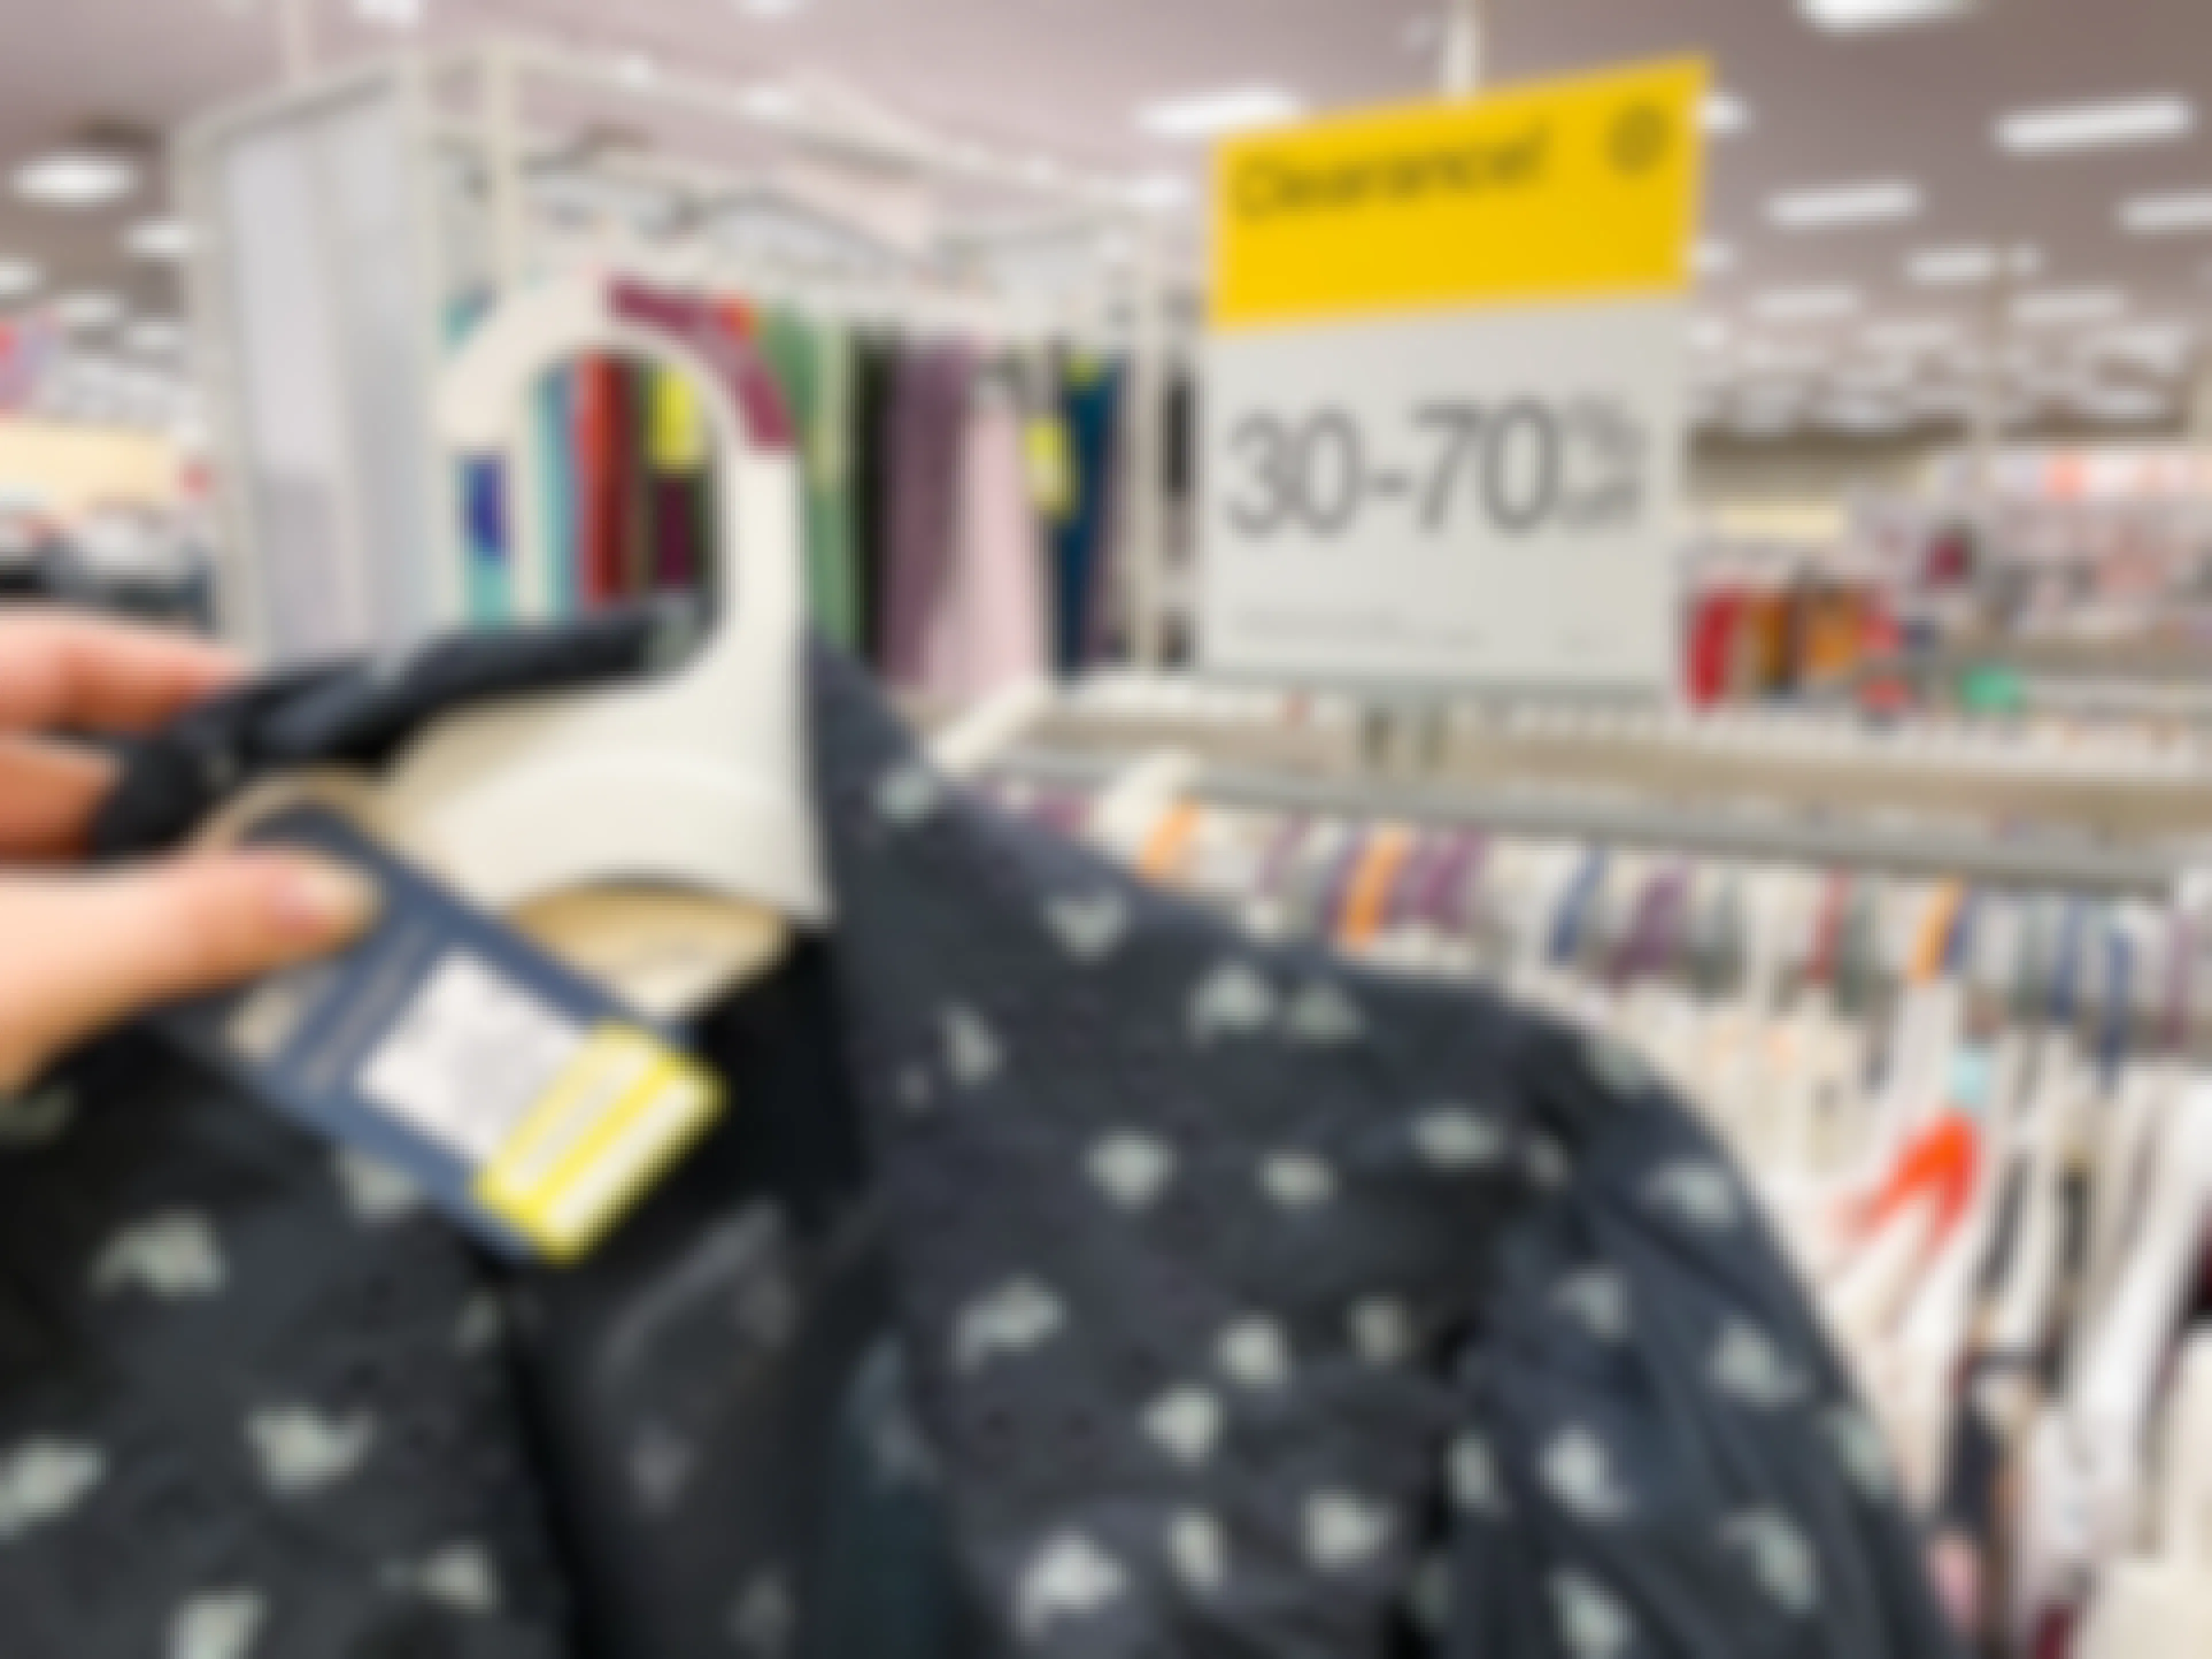 A clearance shirt being held up in front of a clearance sign on a clothing rack in Target